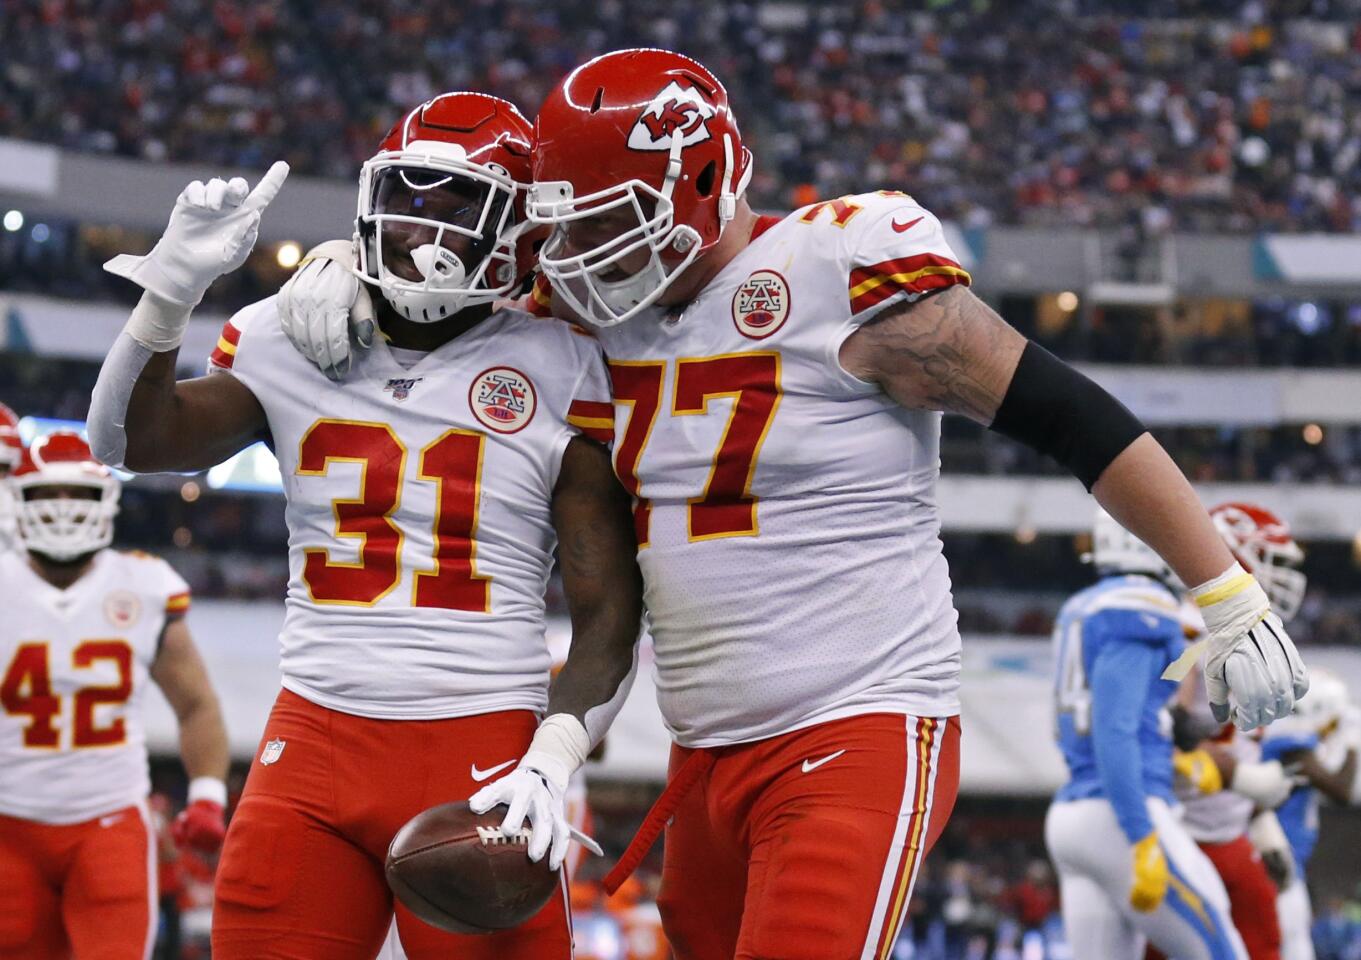 Chiefs running back Darrel Williams (31) celebrates with offensive guard Andrew Wylie after scoring a touchdown against the Chargers on Nov. 18.